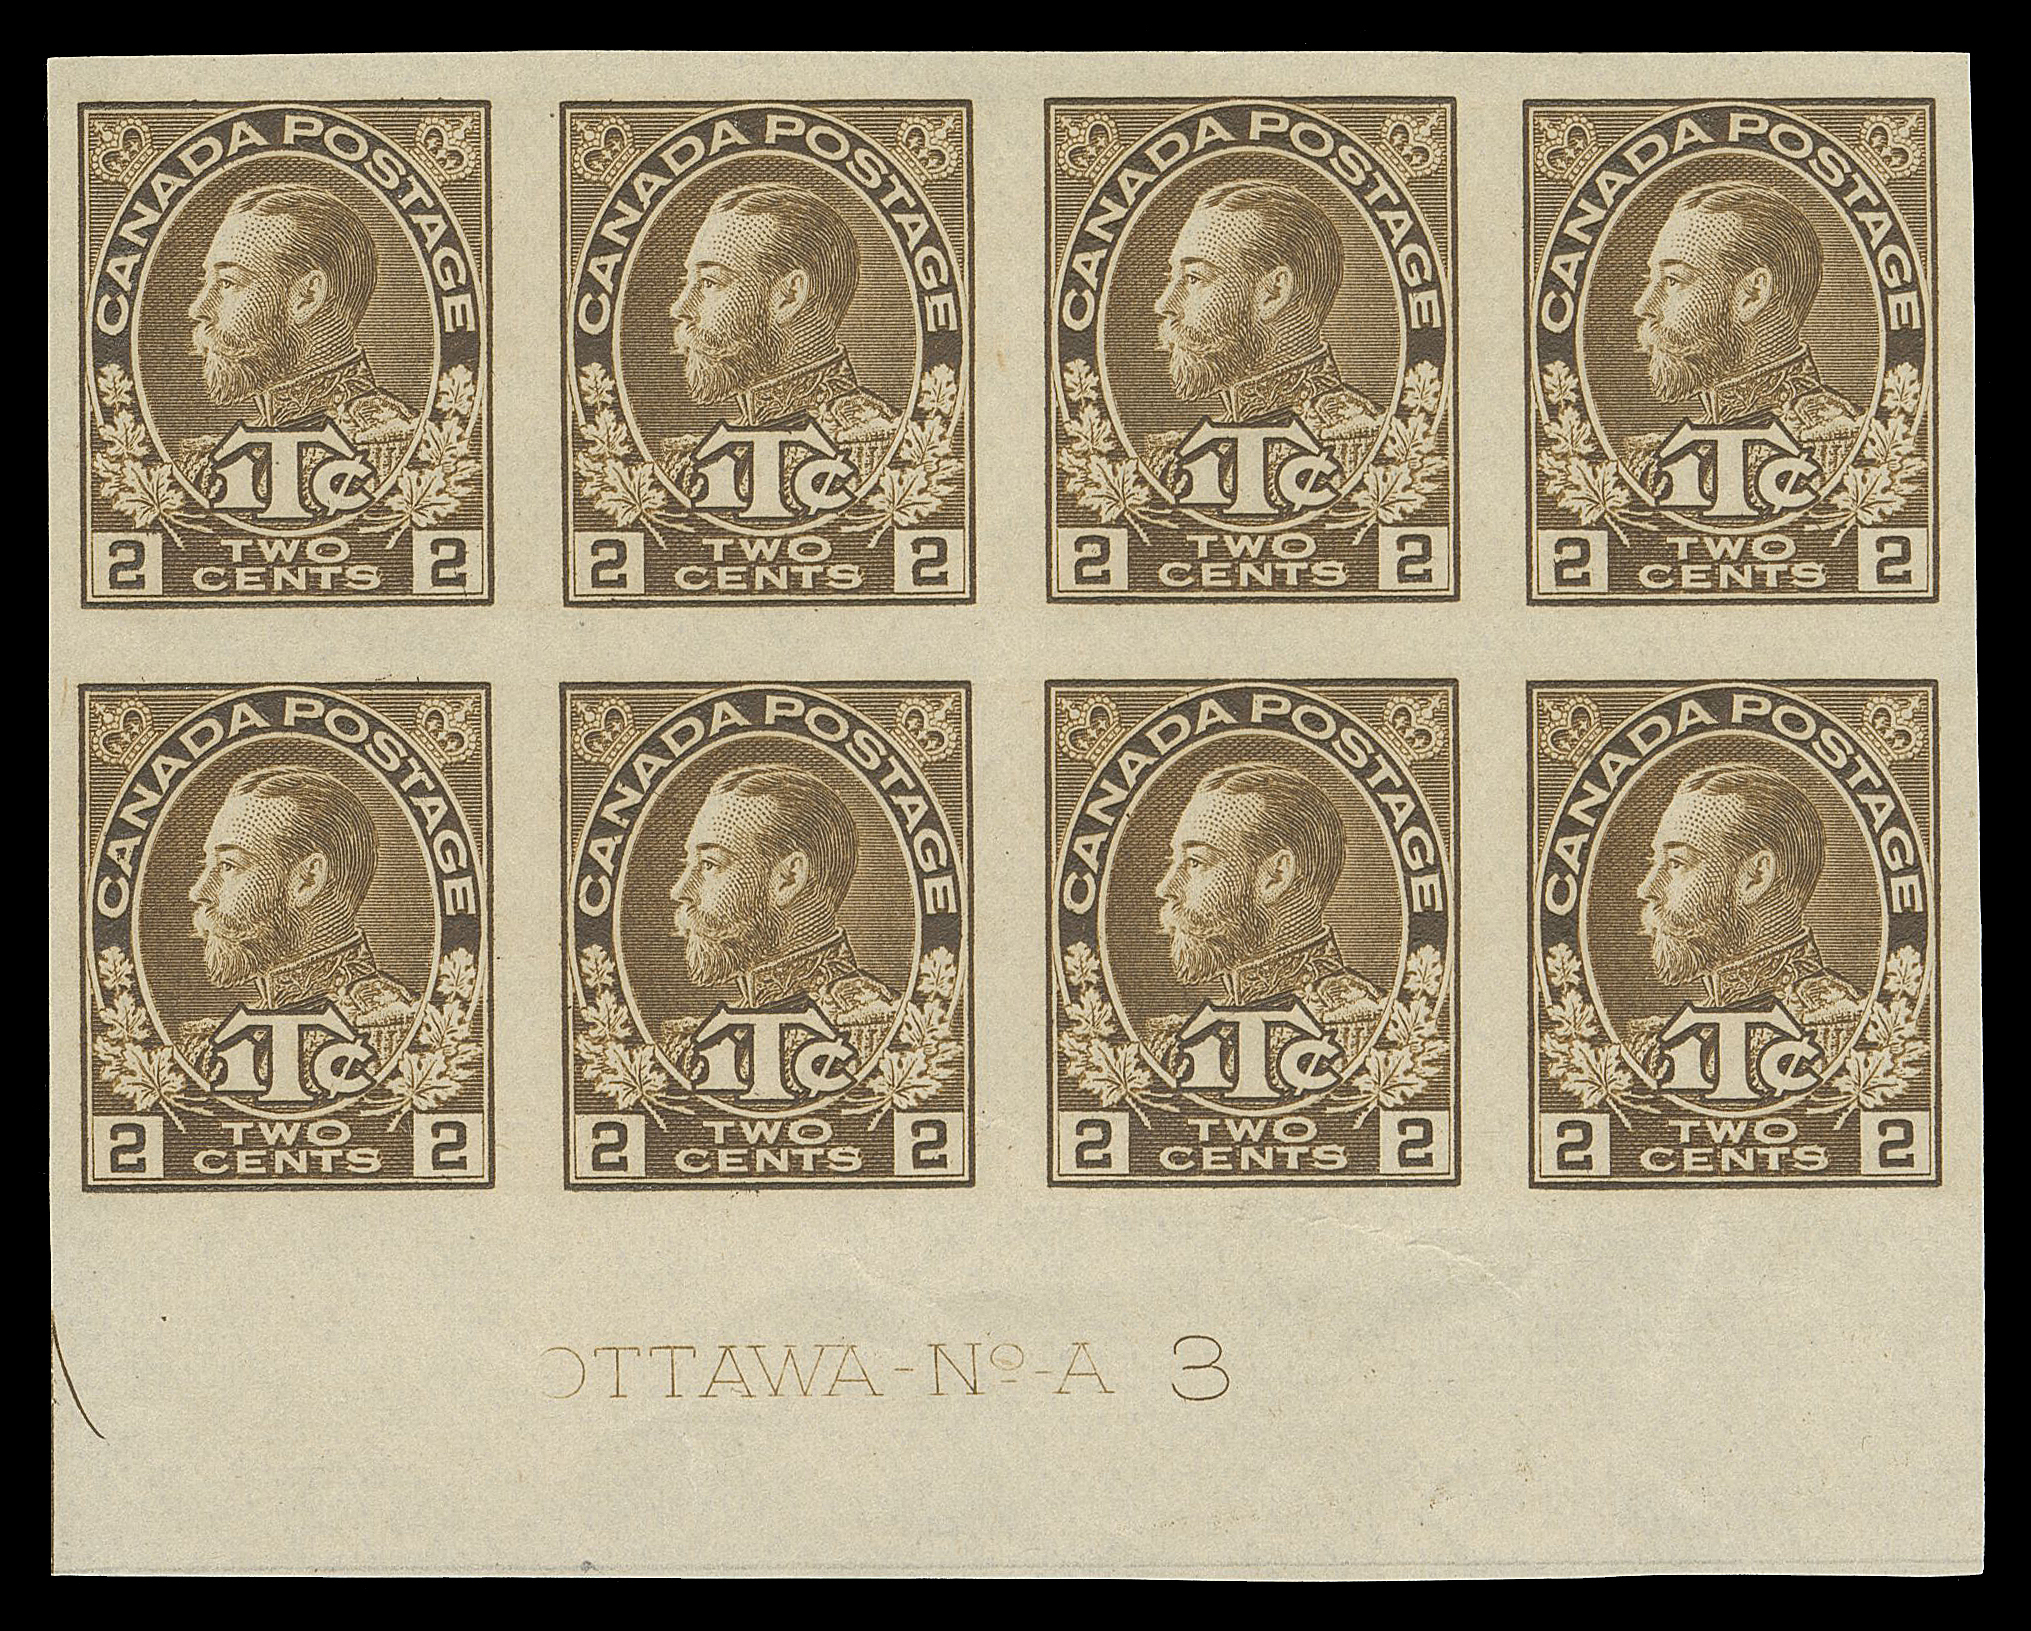 ADMIRAL STAMPS  MR4b,Lower left corner margin imperforate block of eight with complete Plate 3 imprint, portion of guide arrow visible at left; couple minor wrinkles mainly confined to selvedge; a rare imperforate plate block, VF

Provenance: C.M. Jephcott (private sale circa. 1980s)

The 2c+1c brown War Tax stamps from Plate 3 and 4 were never issued as regular perforated stamps; these plates were designated for the coil stamps.